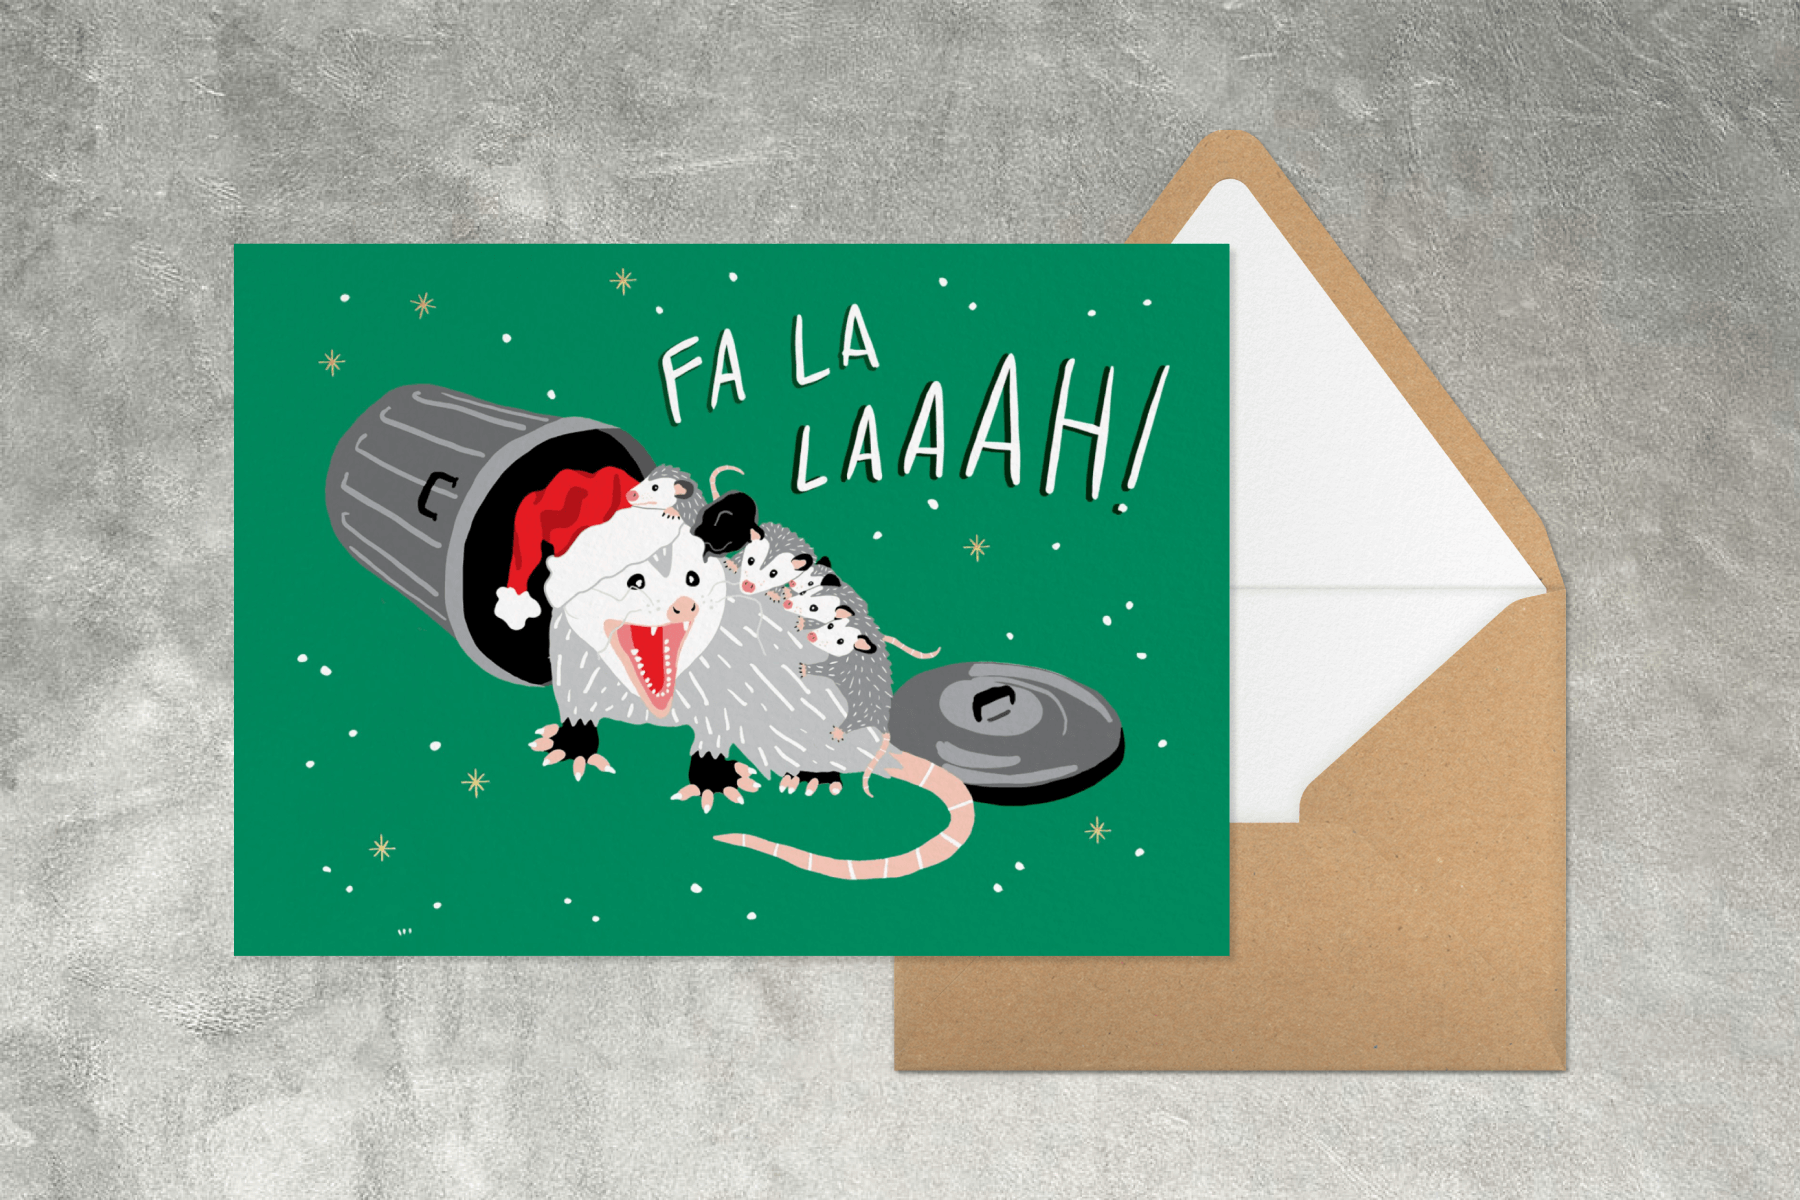 A green card with an opossum wearing a Santa hat and baby possums emerging from a trash can.